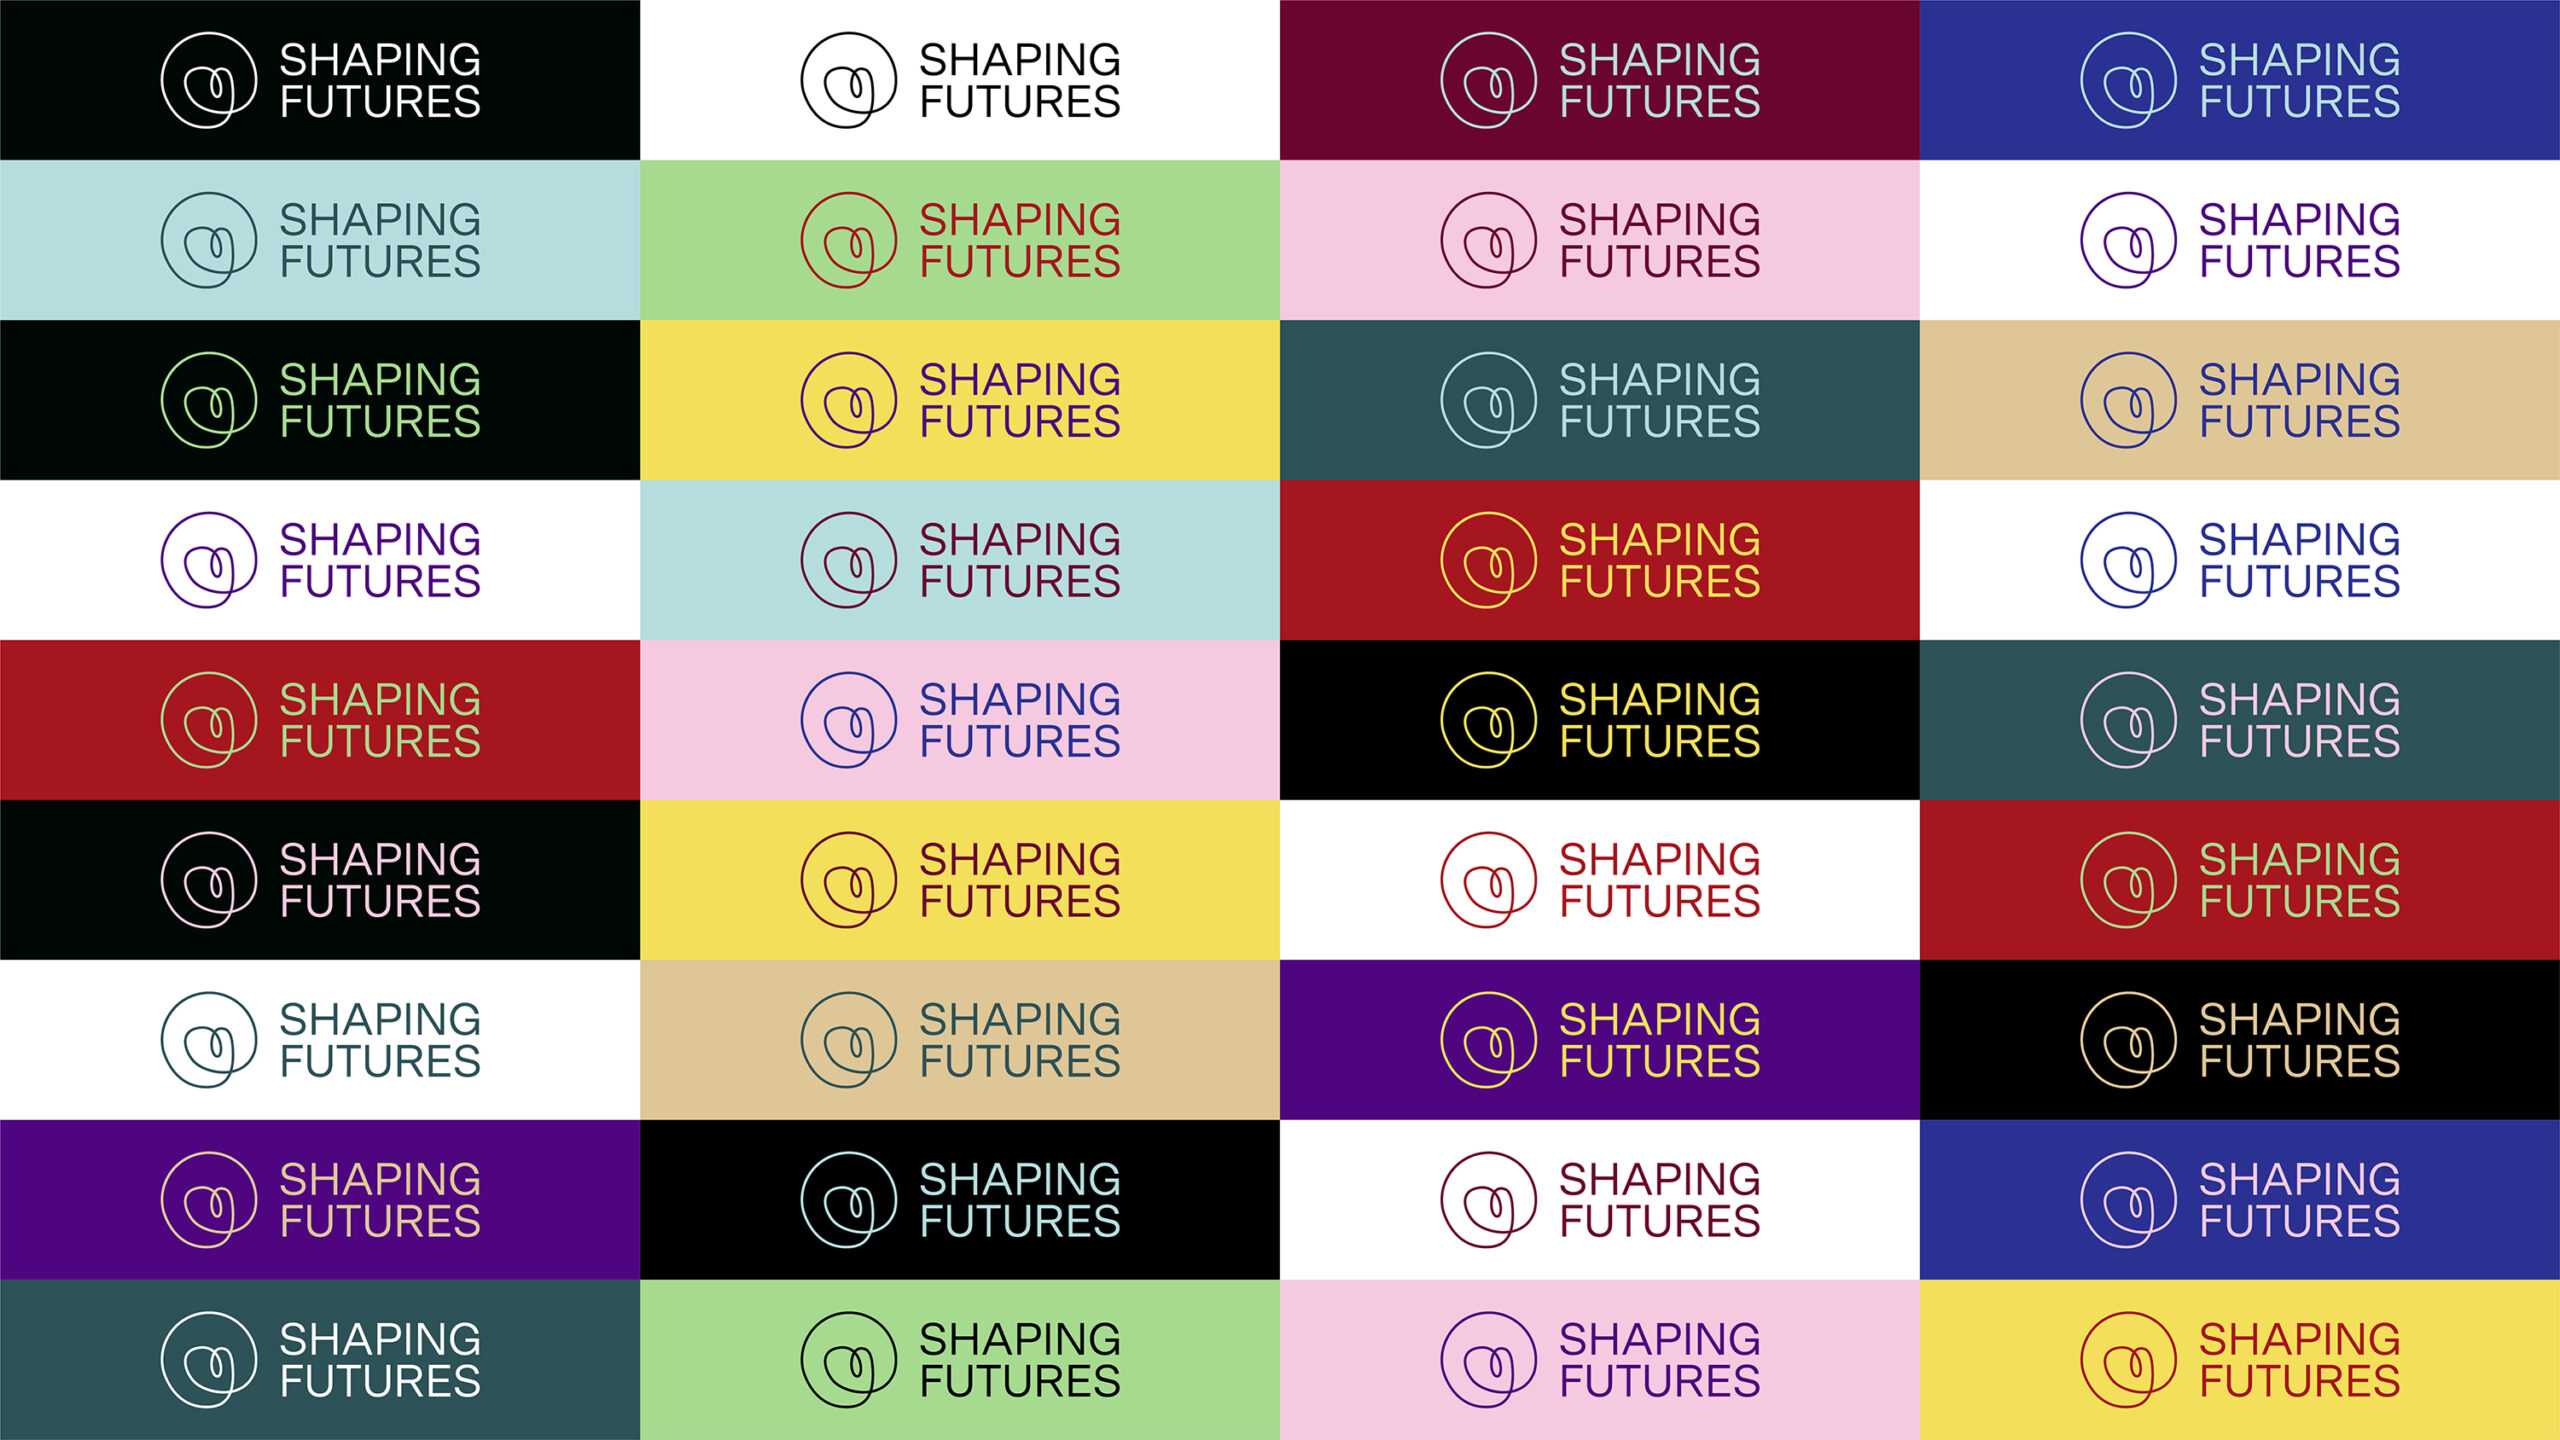 logo variations of shaping futures with different colors